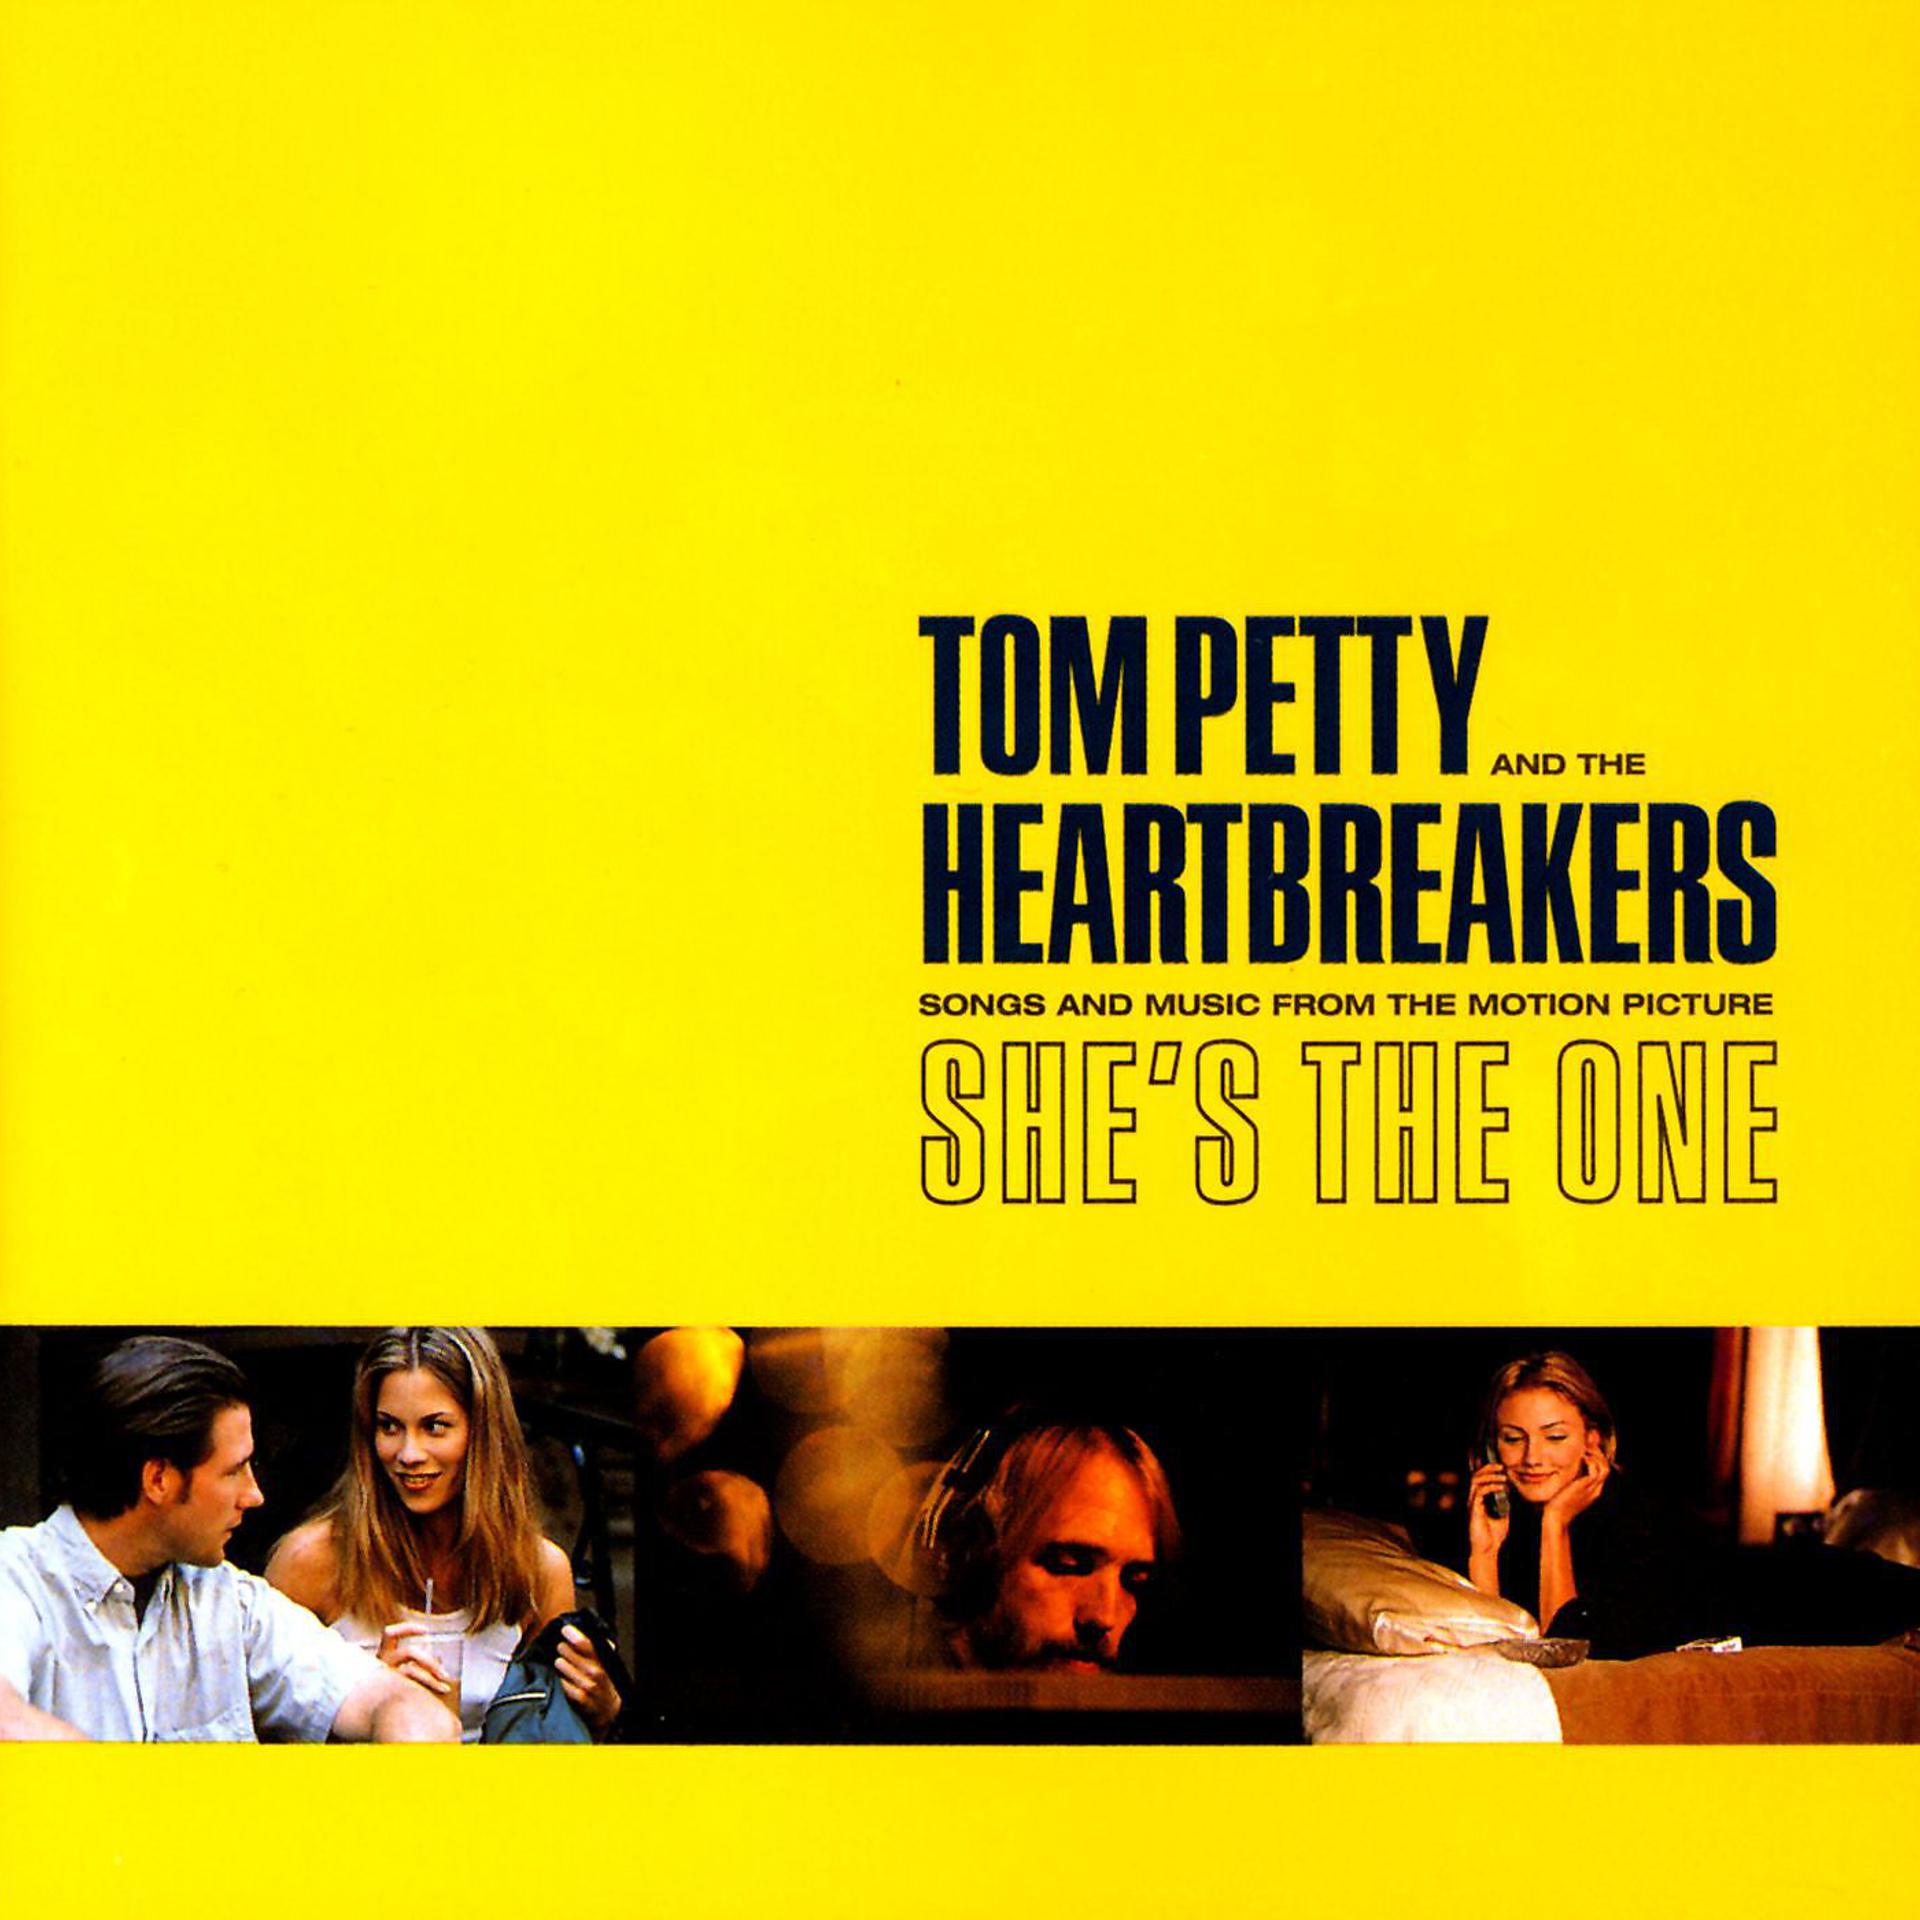 Постер к треку Tom Petty and the Heartbreakers - Zero from Outer Space